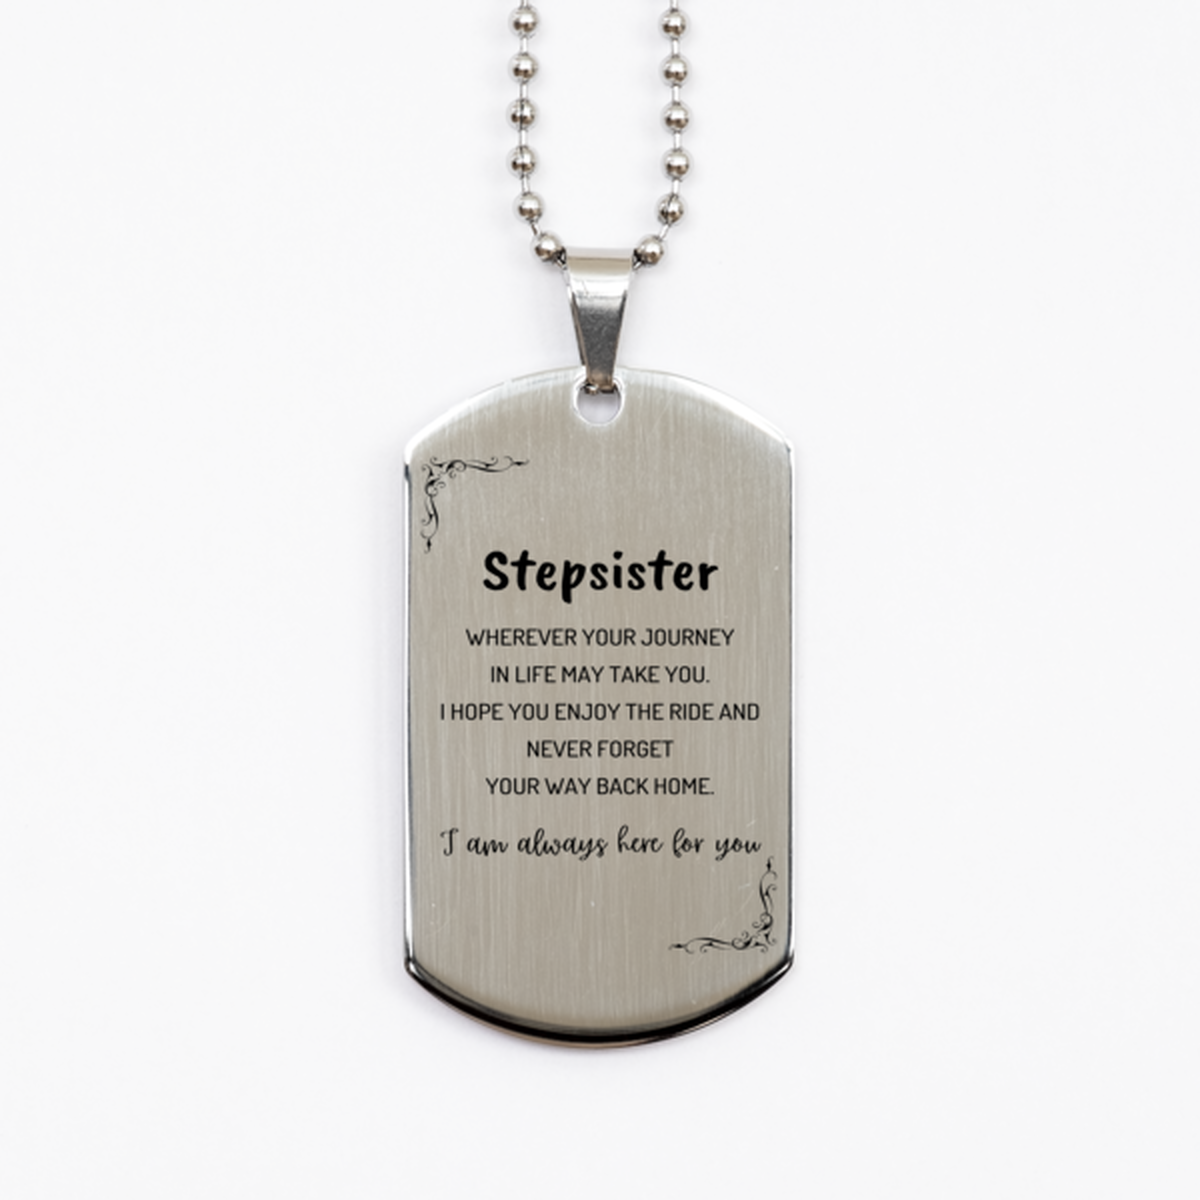 Stepsister wherever your journey in life may take you, I am always here for you Stepsister Silver Dog Tag, Awesome Christmas Gifts For Stepsister, Stepsister Birthday Gifts for Men Women Family Loved One